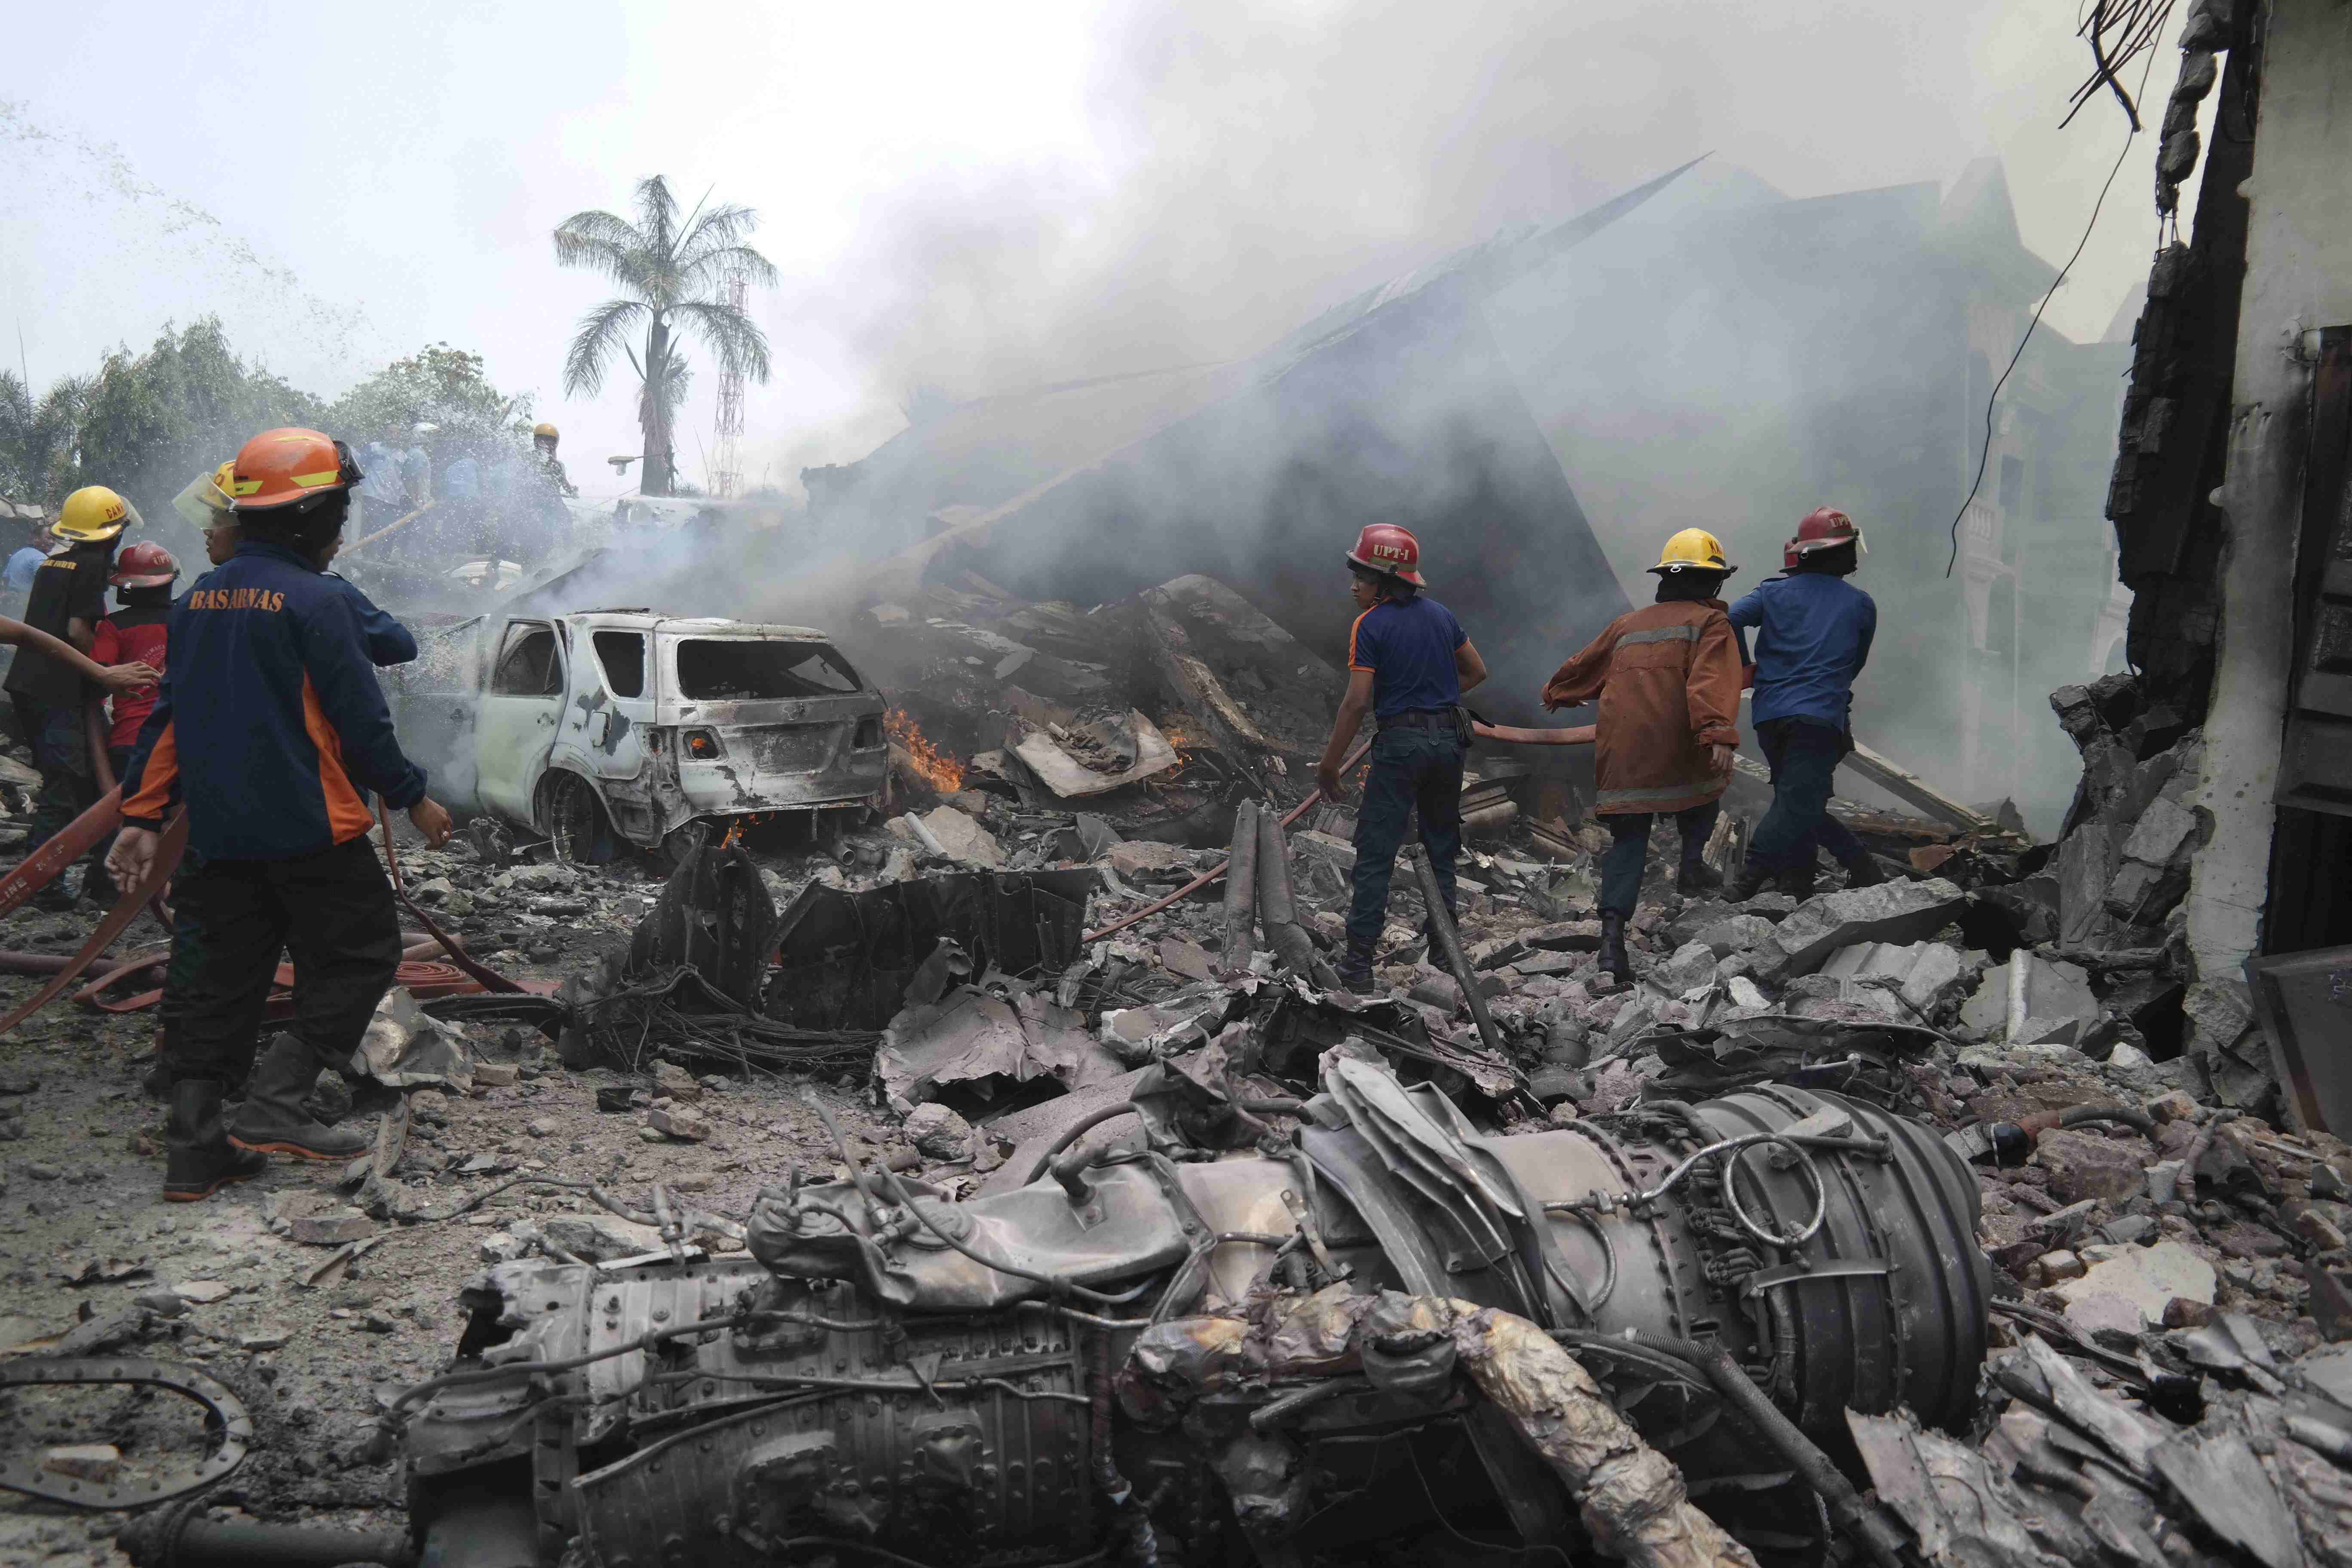 Firemen attempt to extinguish the fire surrounding the wreckage of an Indonesian military transport plane after it crashed in the North Sumatra city of Medan